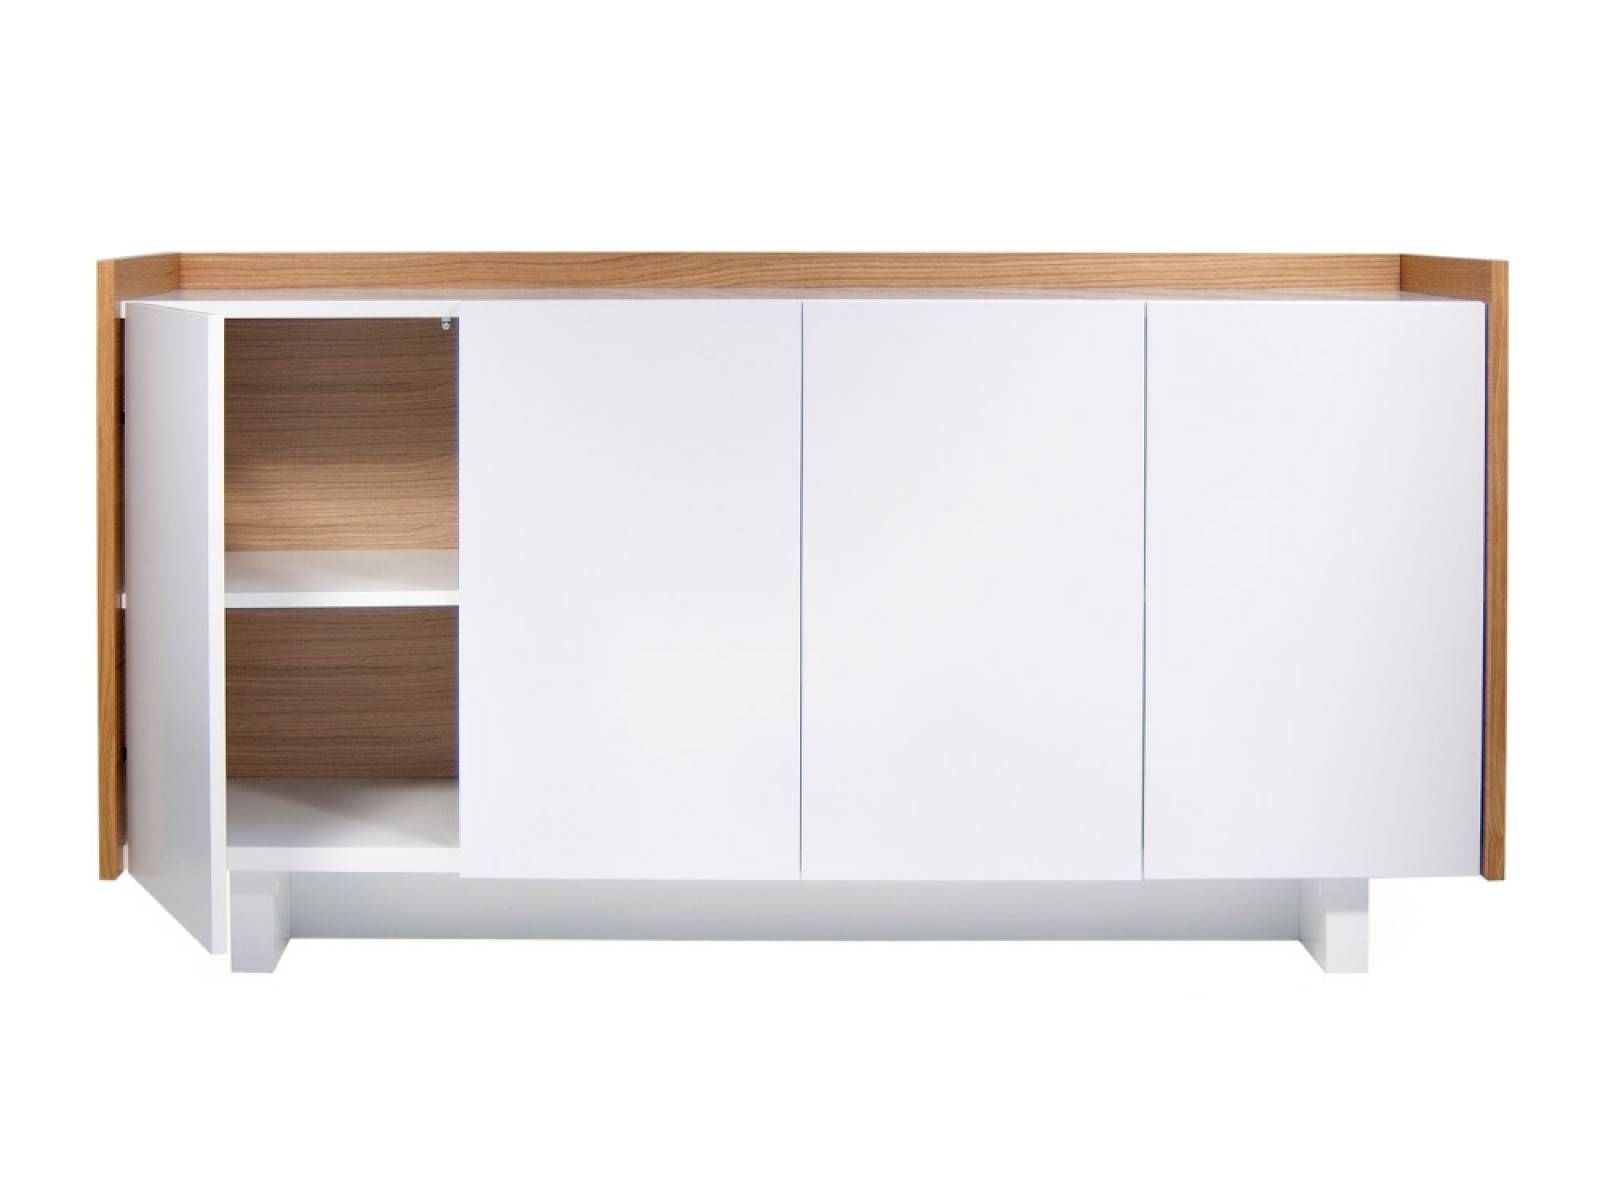 Furniture: 12 Inch Deep Sideboard With Modern Sideboard Also With 12 Inch Deep Sideboard (View 6 of 20)